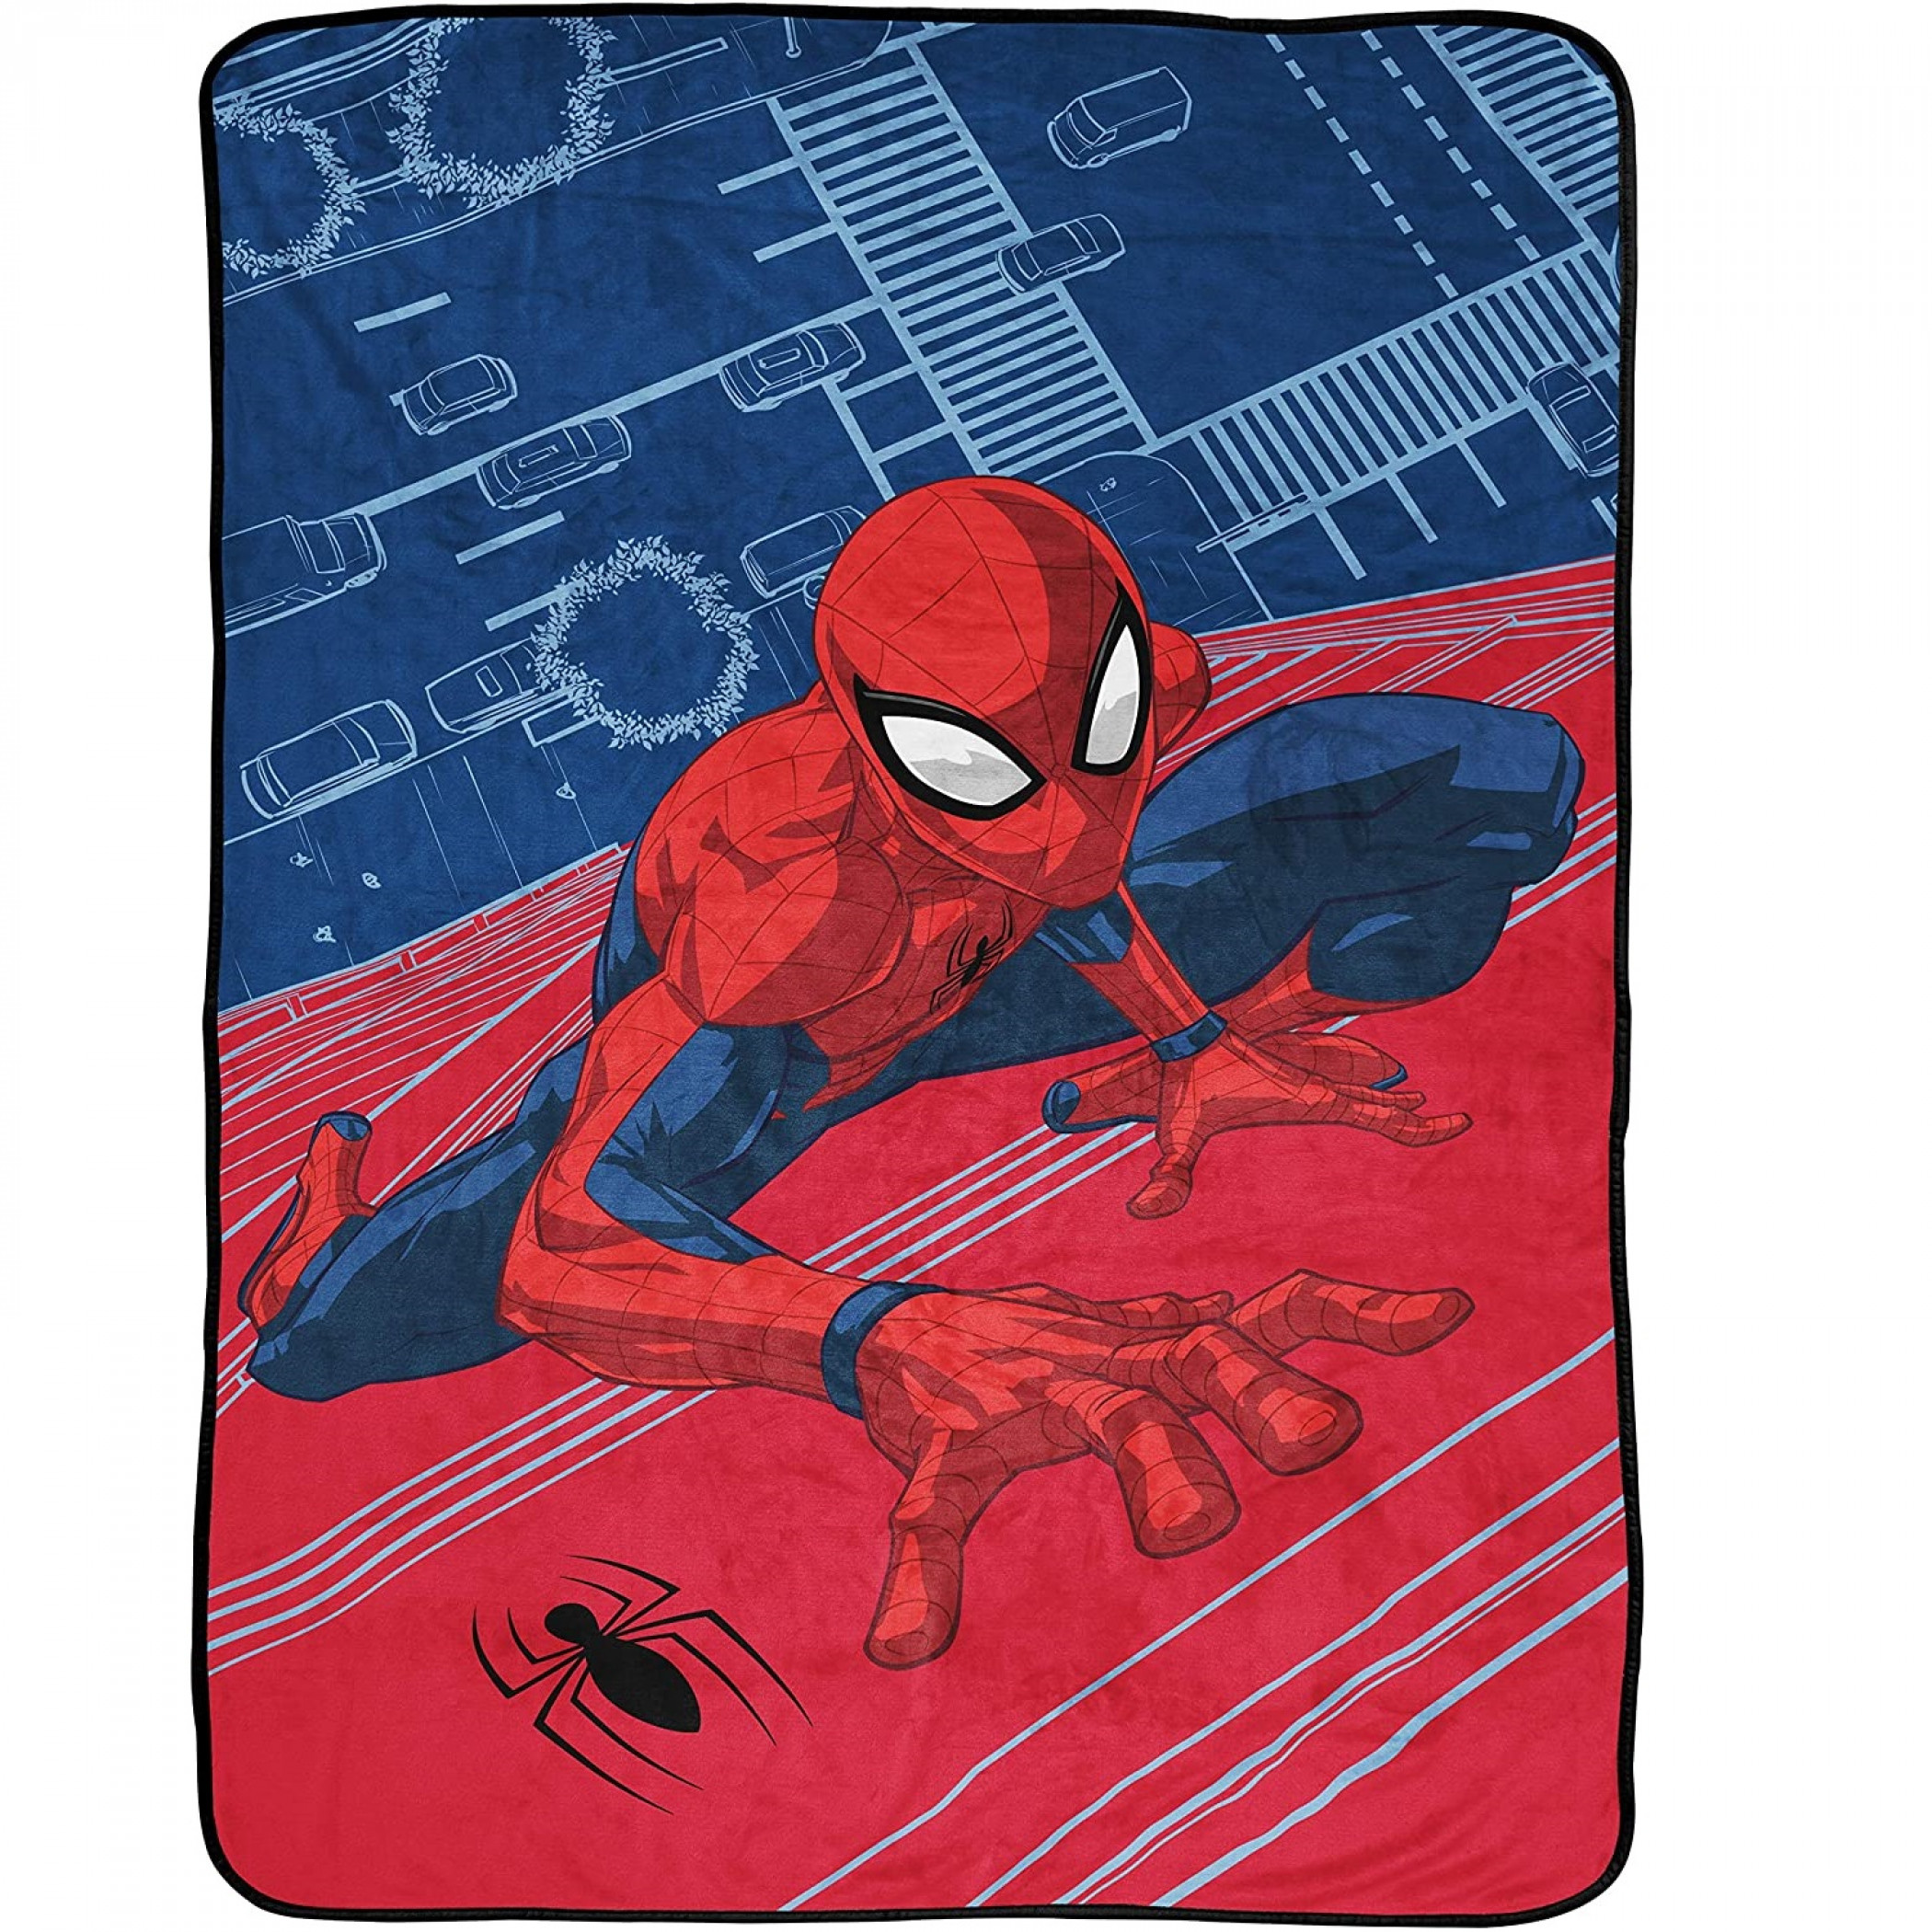 Spider-Man Wall Crawling Character 46 x 60 Throw Blanket